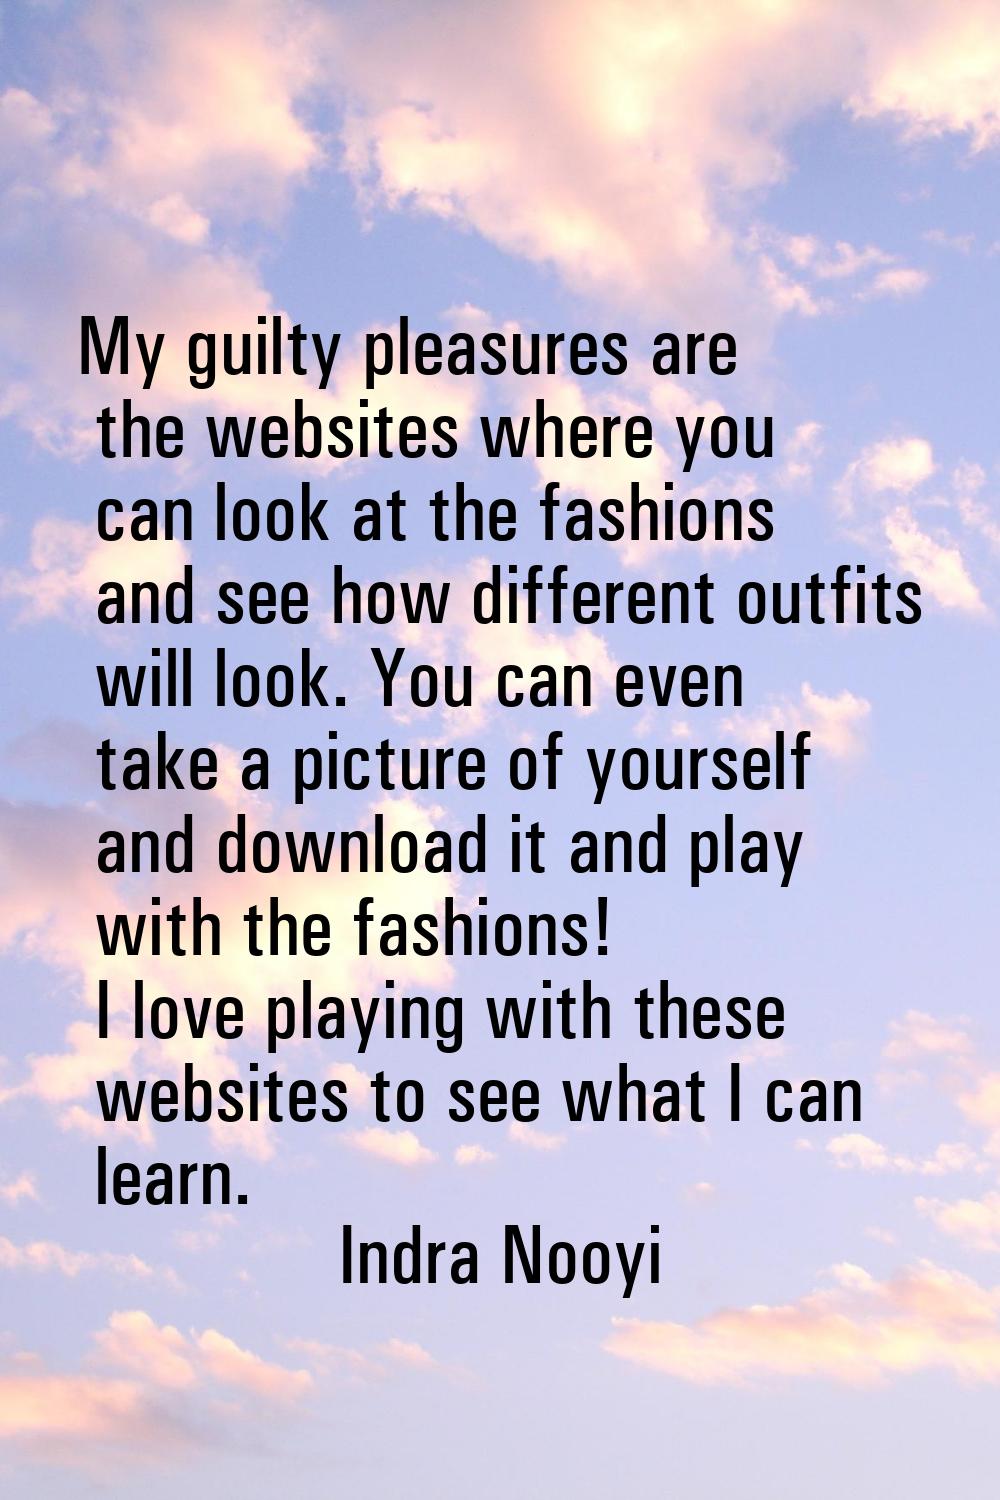 My guilty pleasures are the websites where you can look at the fashions and see how different outfi